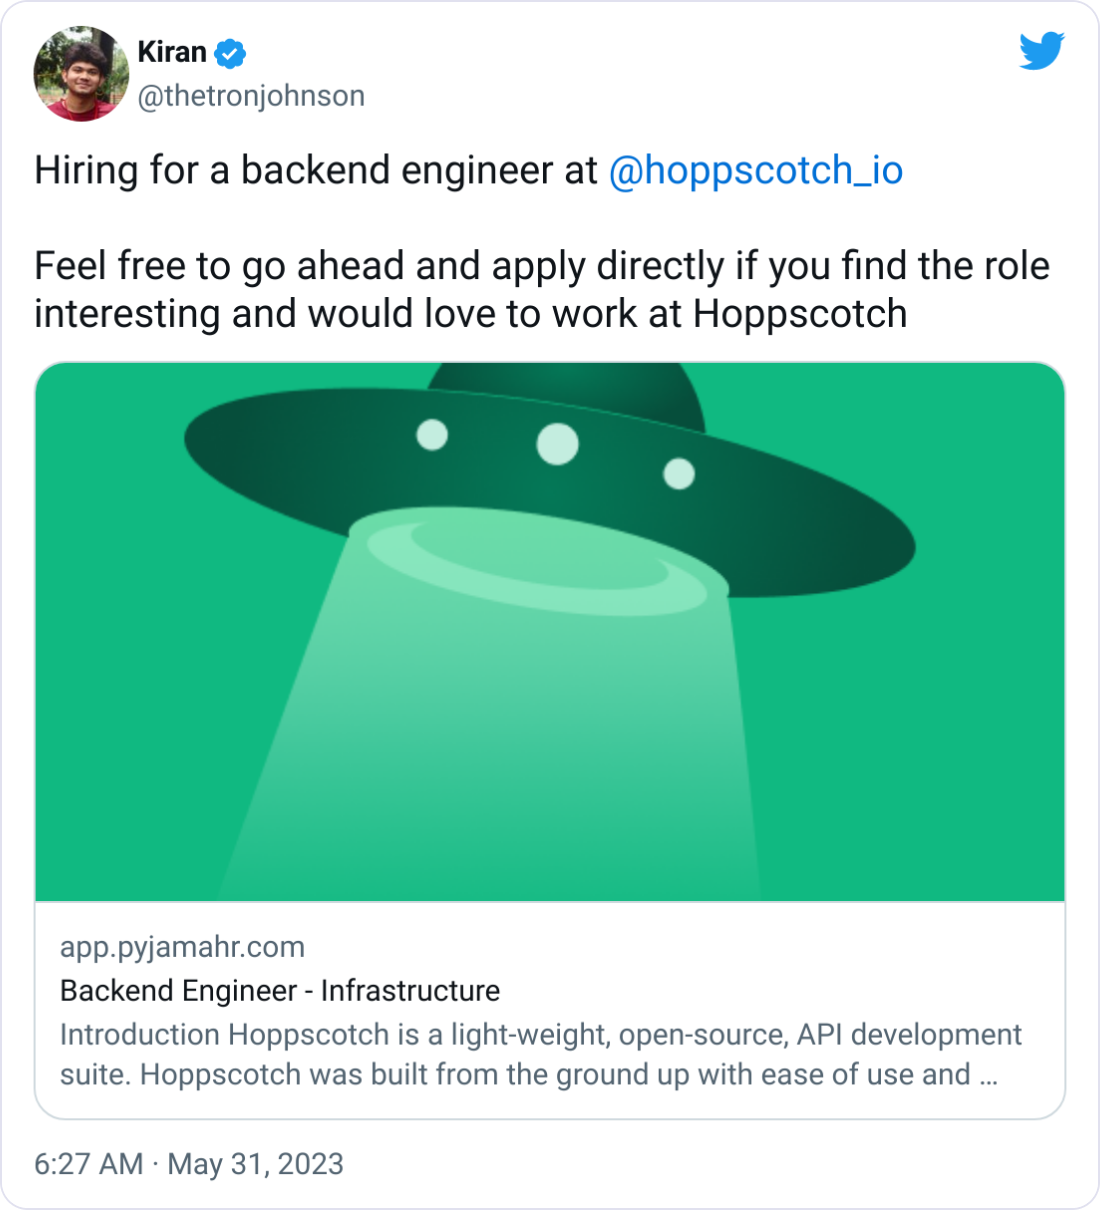 Kiran @thetronjohnson Hiring for a backend engineer at  @hoppscotch_io   Feel free to go ahead and apply directly if you find the role interesting and would love to work at Hoppscotch